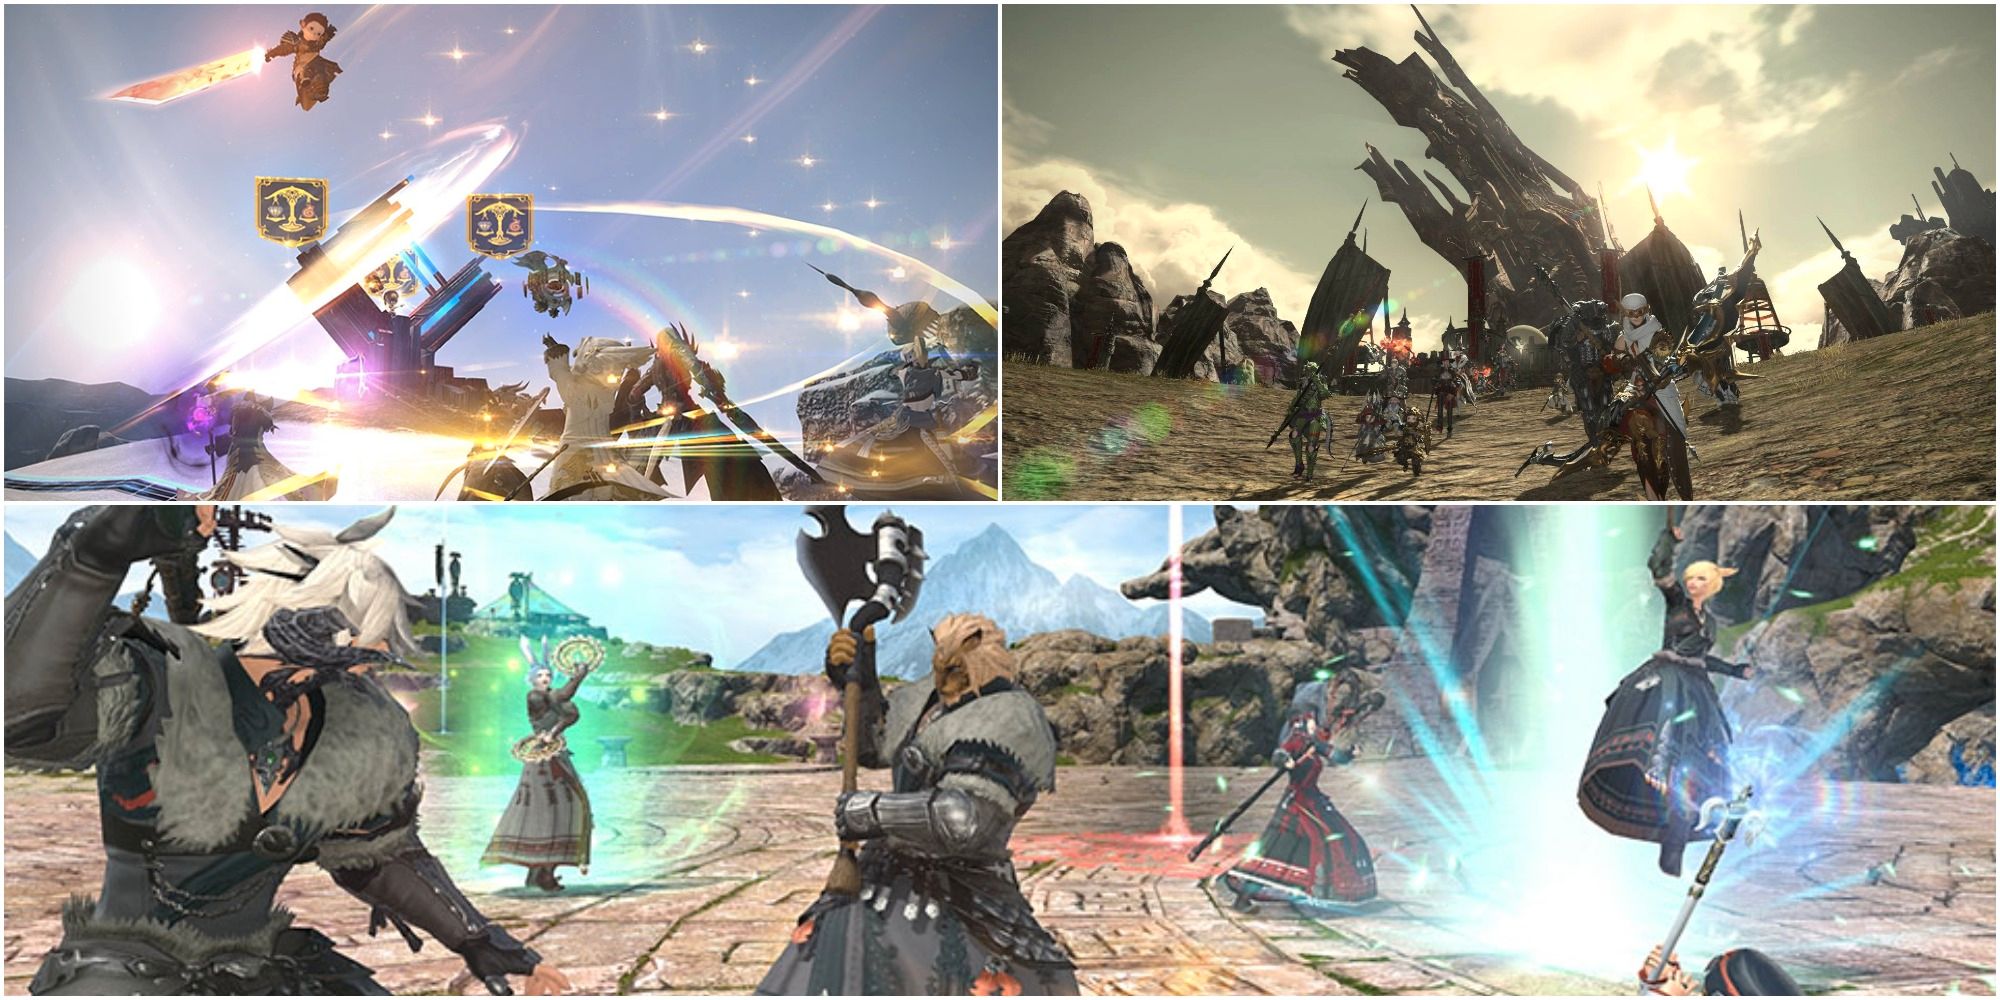 Featured Image for Final Fantasy 14: Frontline PvP Guide